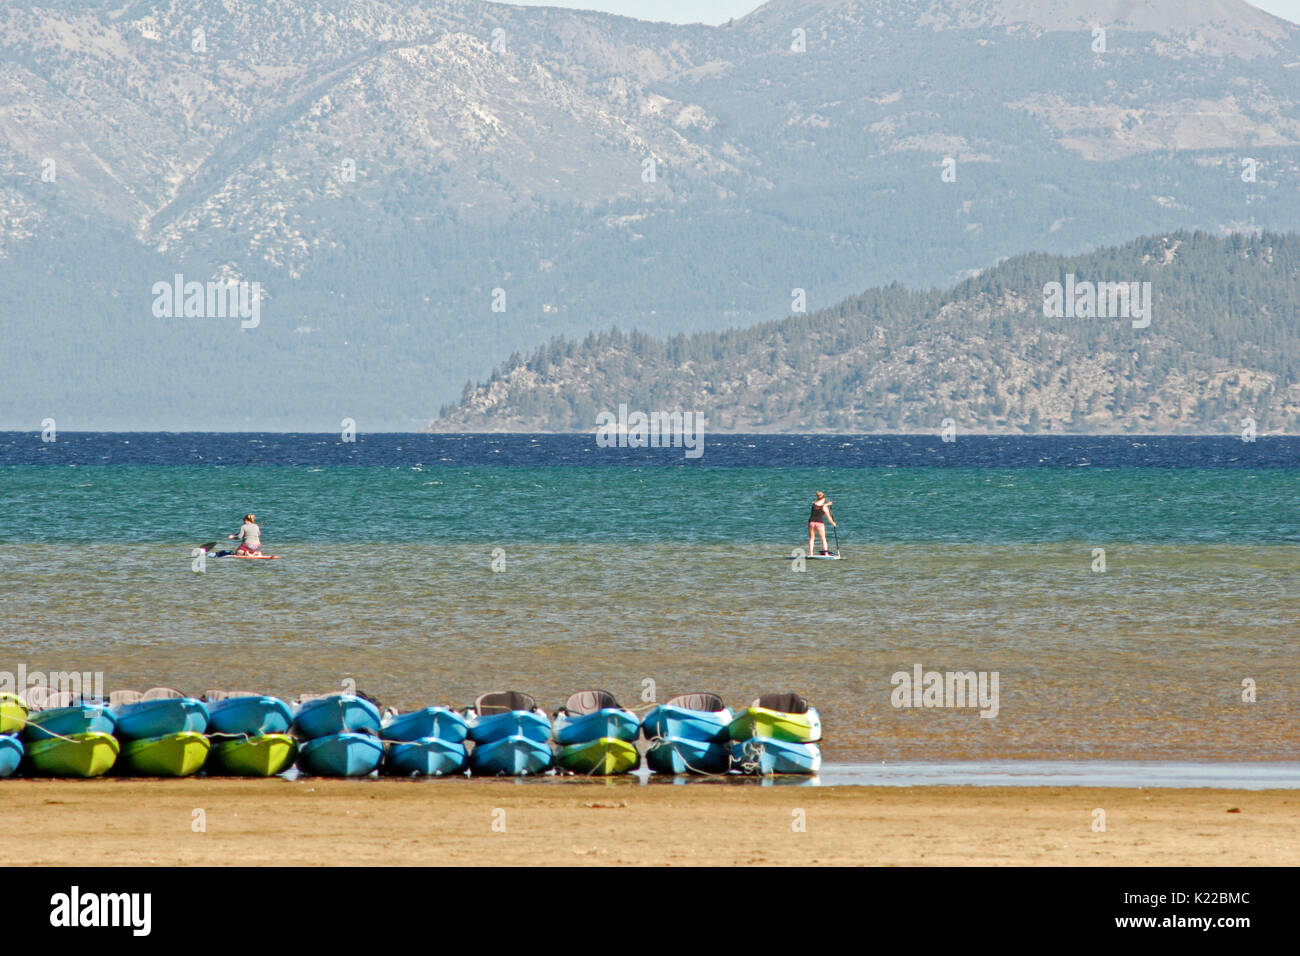 PADDLE BOARDERS USING LAKE TAHOE DURING DROUGHT, CALIFORNIA Stock Photo